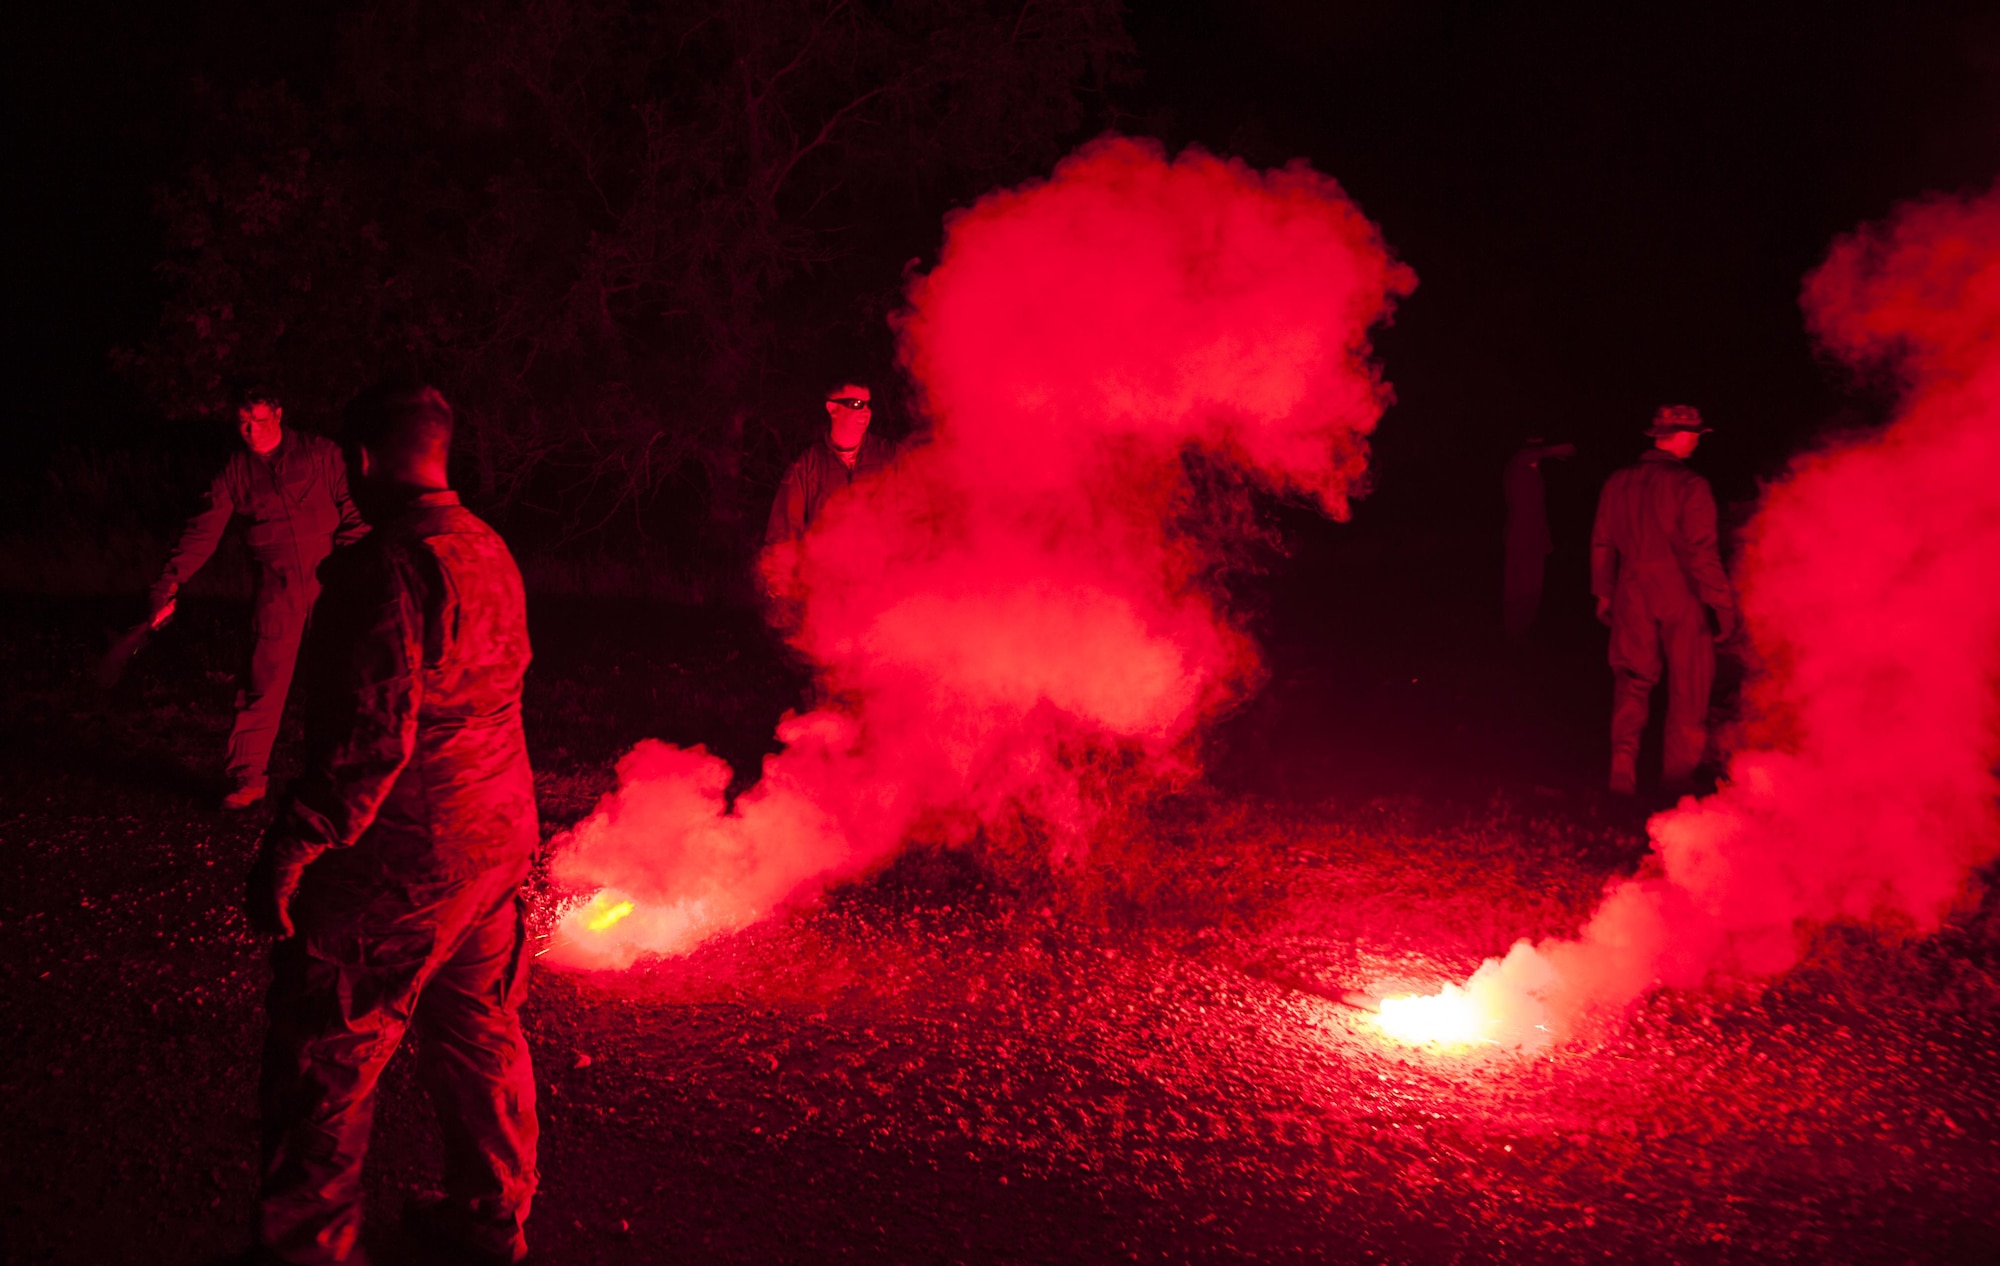 Minot Airmen pop flares with survive, evasion, resistance and escape specialists at a training facility in Garrison, N.D., Aug. 11, 2016. Members practiced setting off the smoke and flares to learn how to signal for help. (U.S. Air Force photo/Airman 1st Class Christian Sullivan)